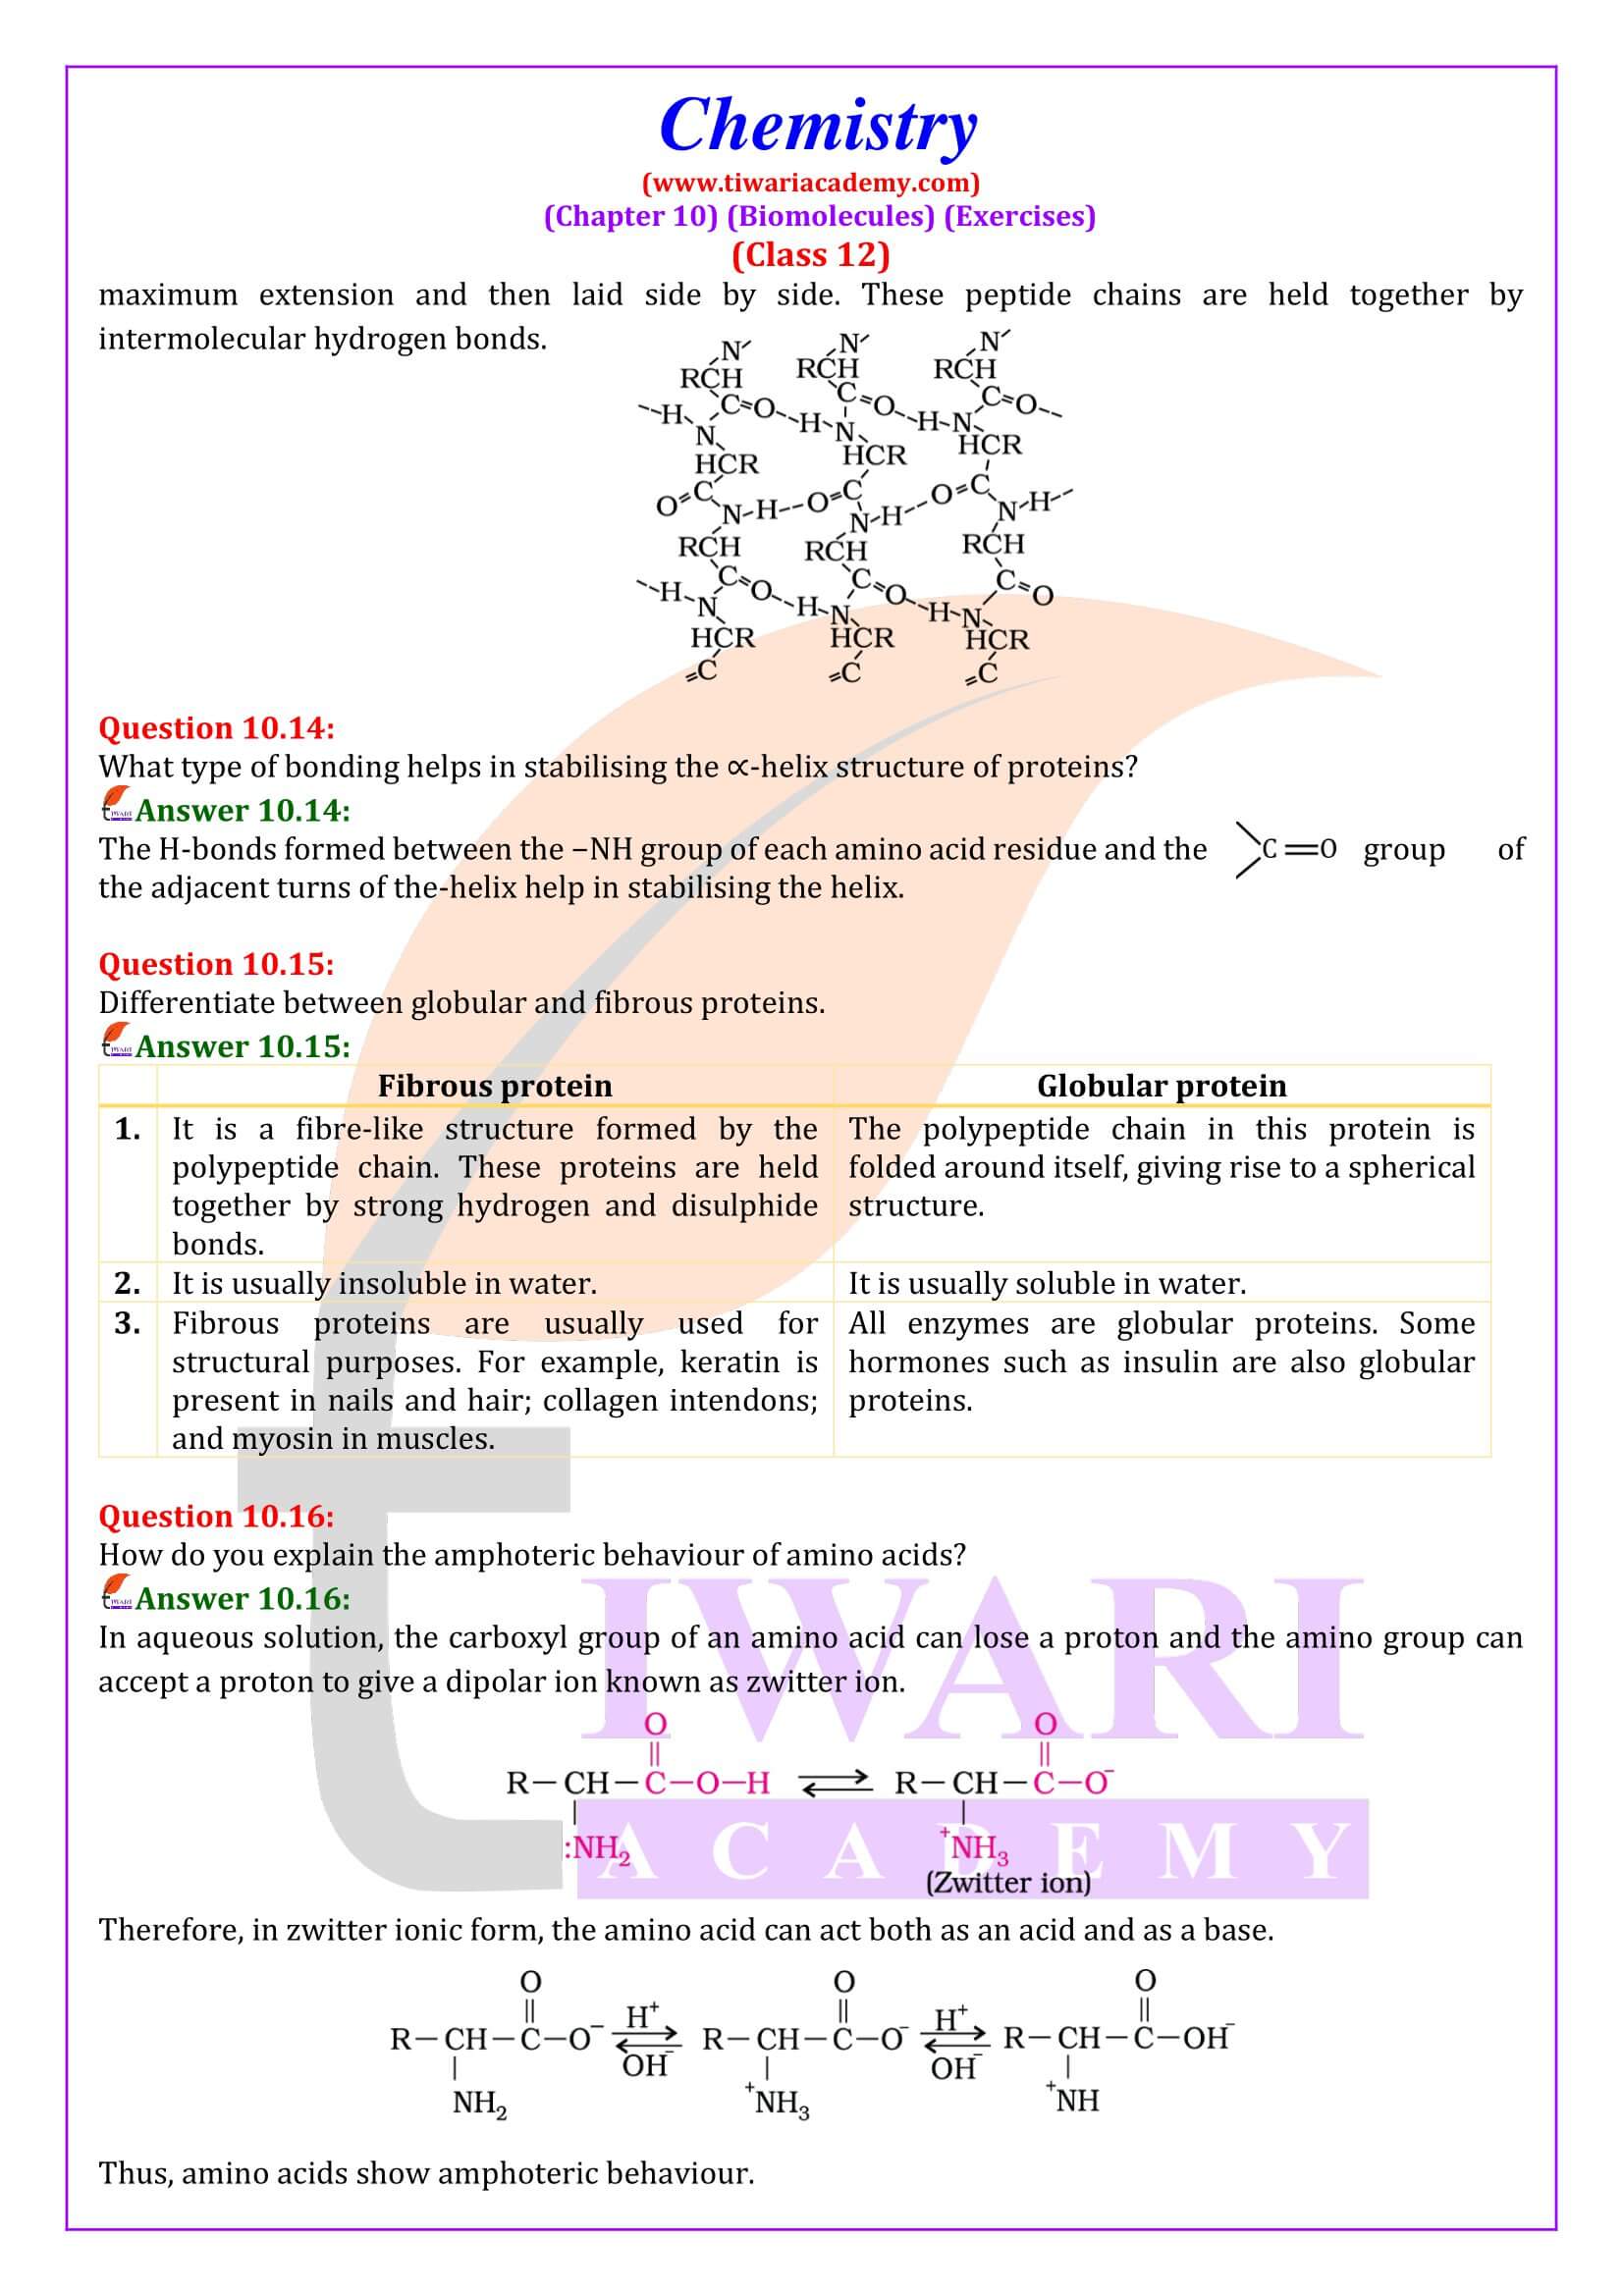 Class 12 Chemistry Chapter 10